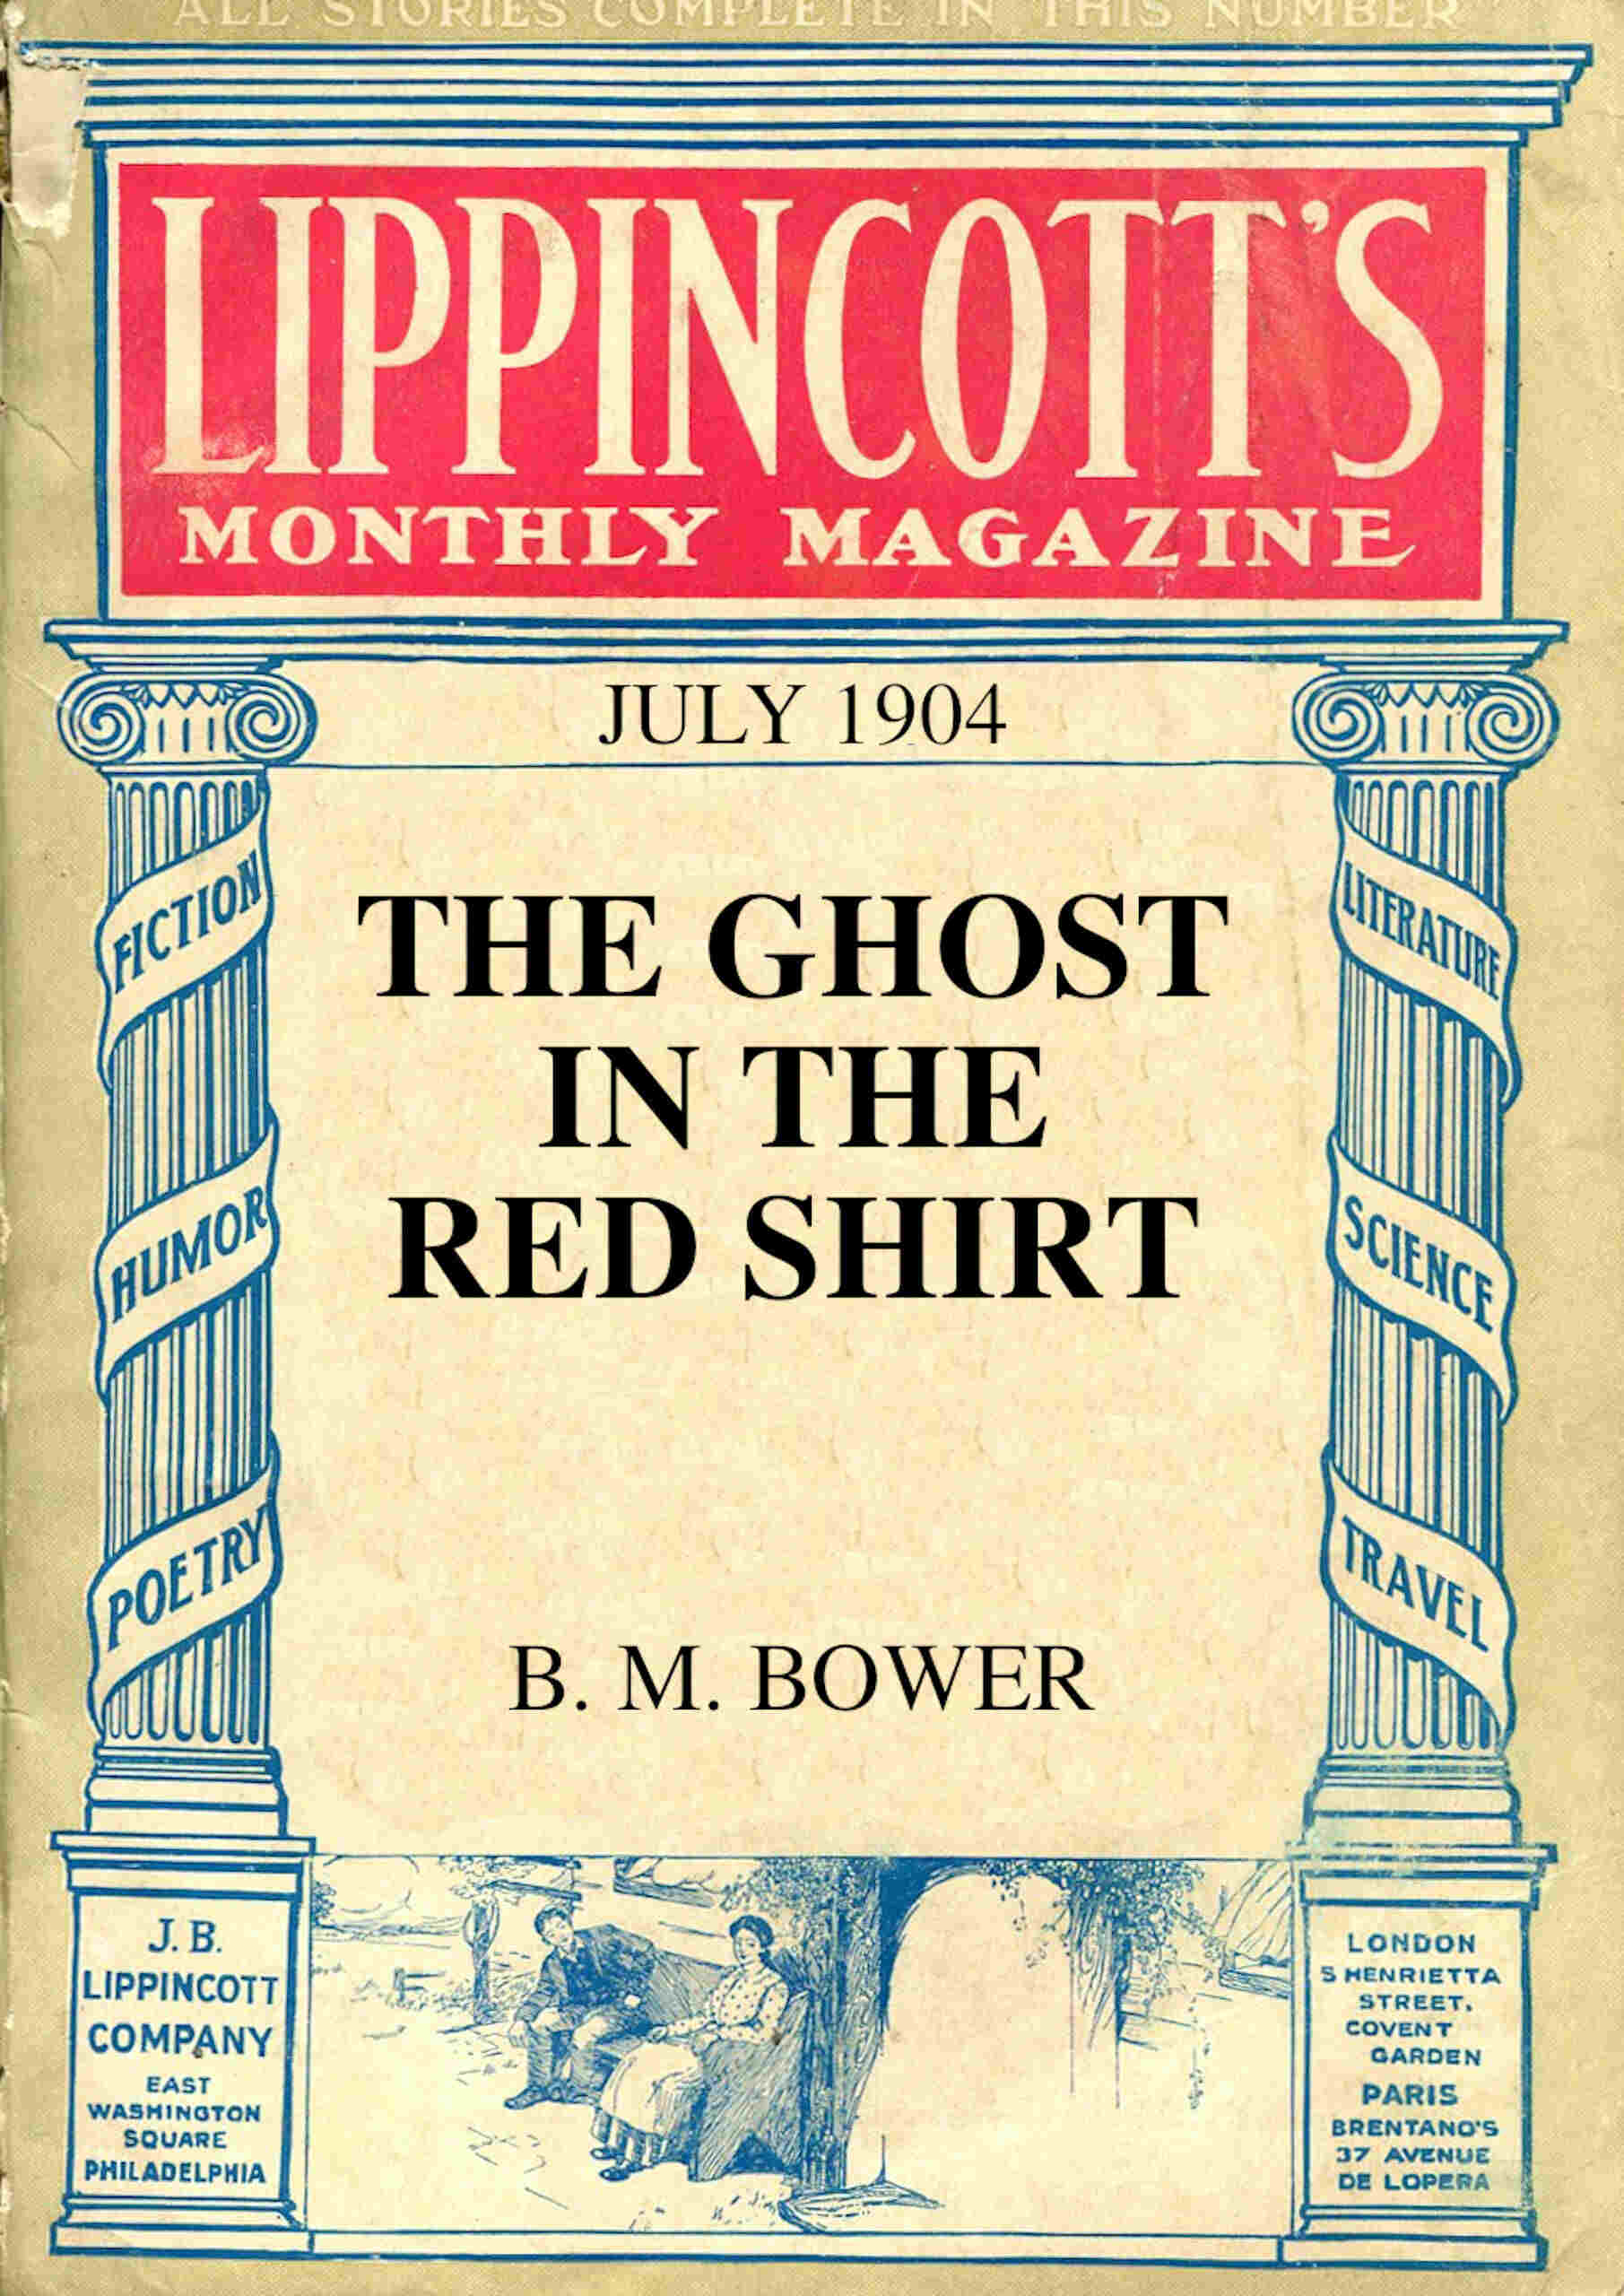 The Ghost in the Red Shirt